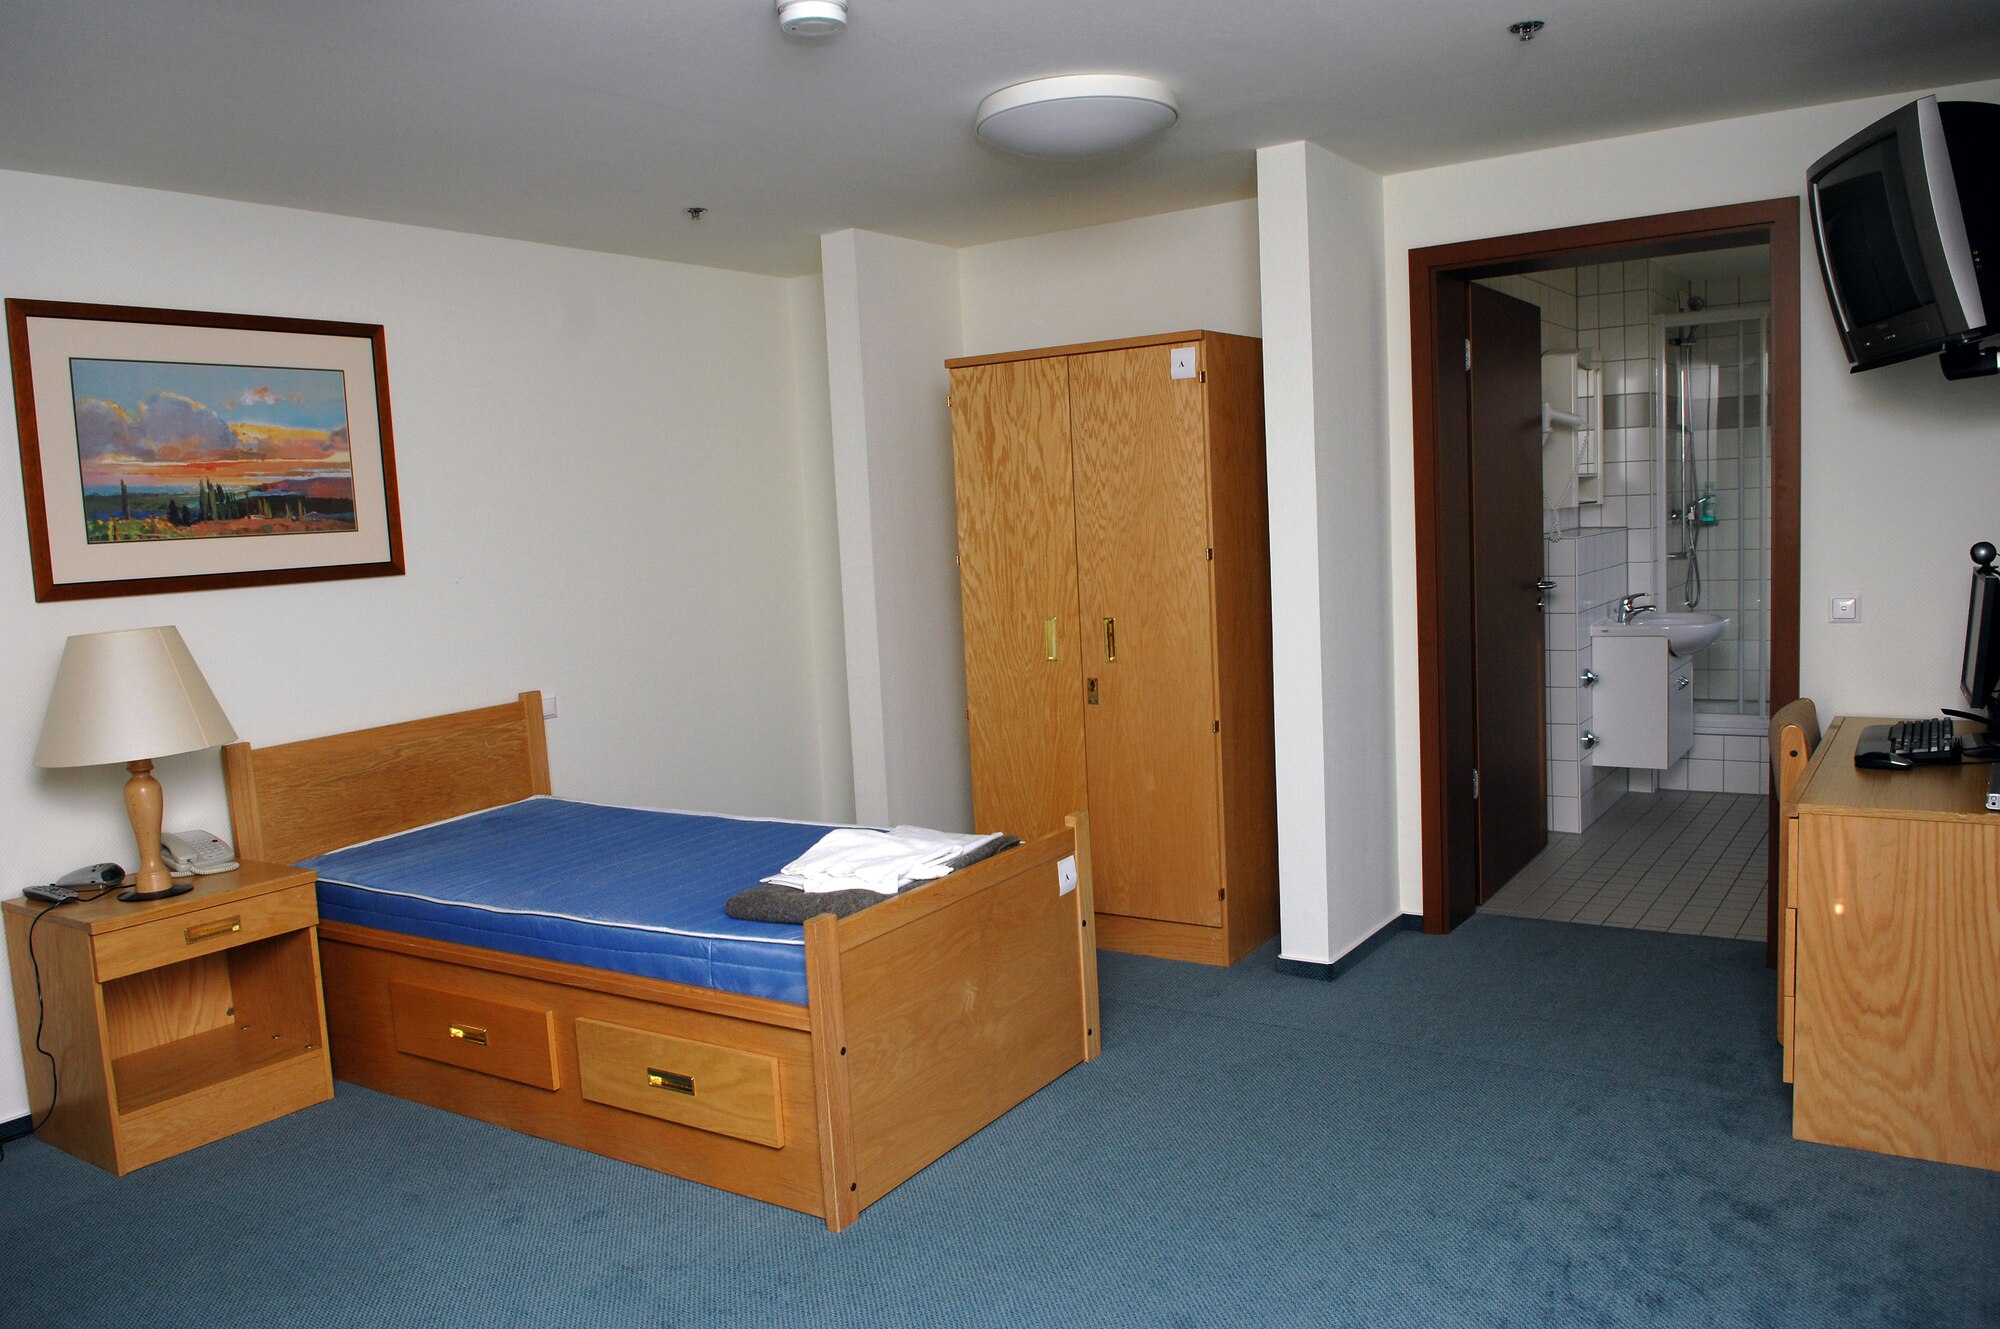 Pictured is an example of a "show room" at the medical transient detachment building at Landstuhl Regional Medical Center, Germany. Two new buildings provide rooms for 190 to 200 wounded warriors and are outfitted with computers, free internet service, cable television, DVD players and telephones. Patients no longer have to endure a 50-mile roundtrip when receiving care at the medical center. (Courtesy photo)